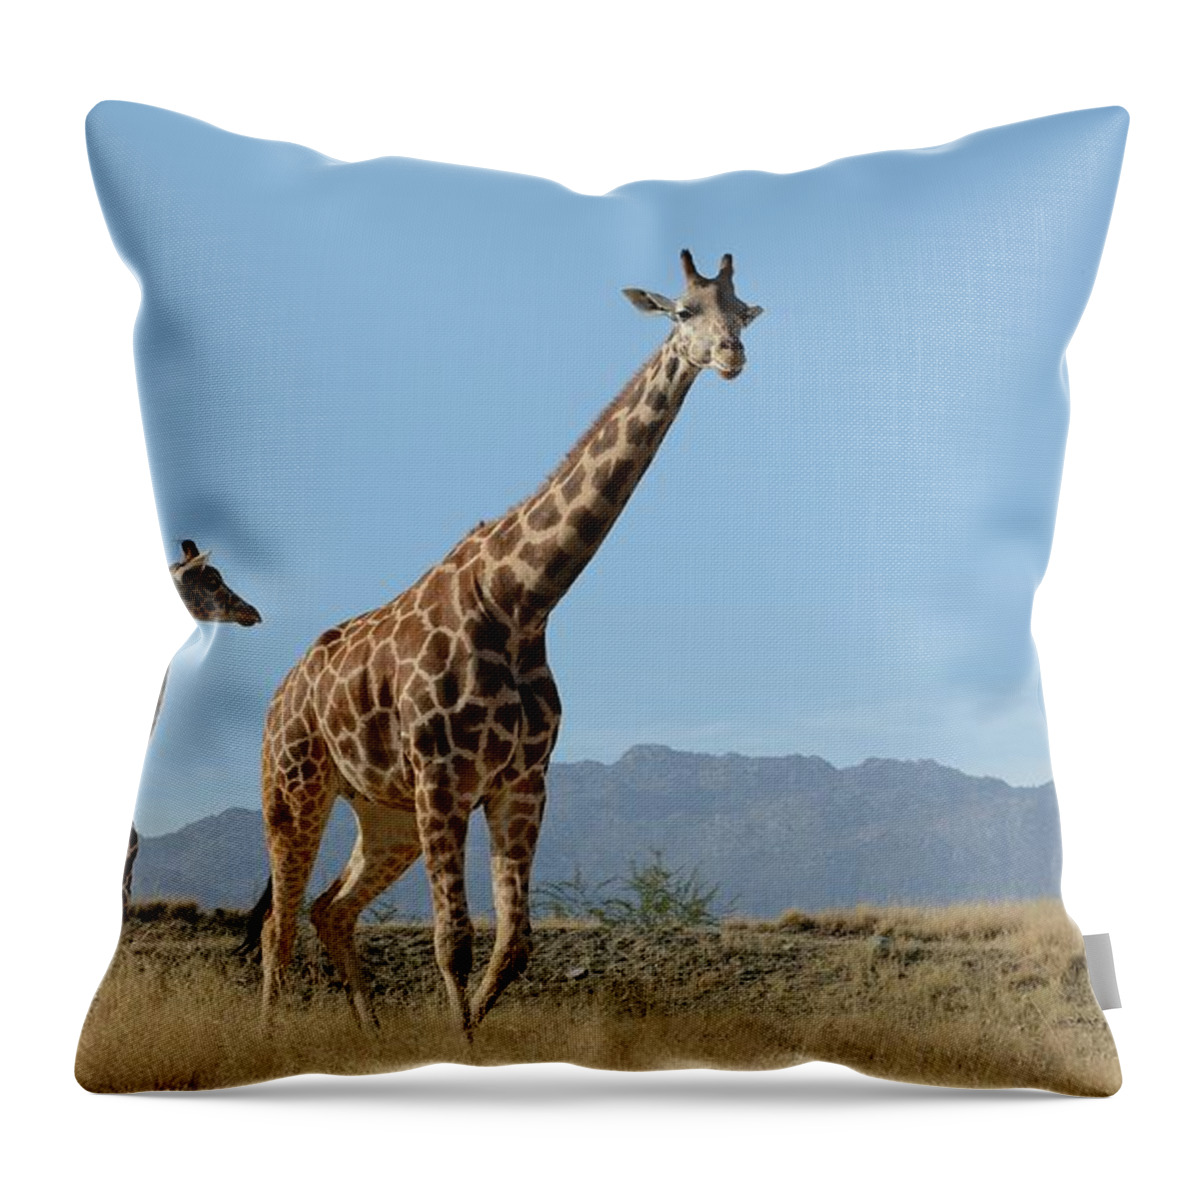 Giraffes Throw Pillow featuring the photograph Walking With Mom by Fraida Gutovich